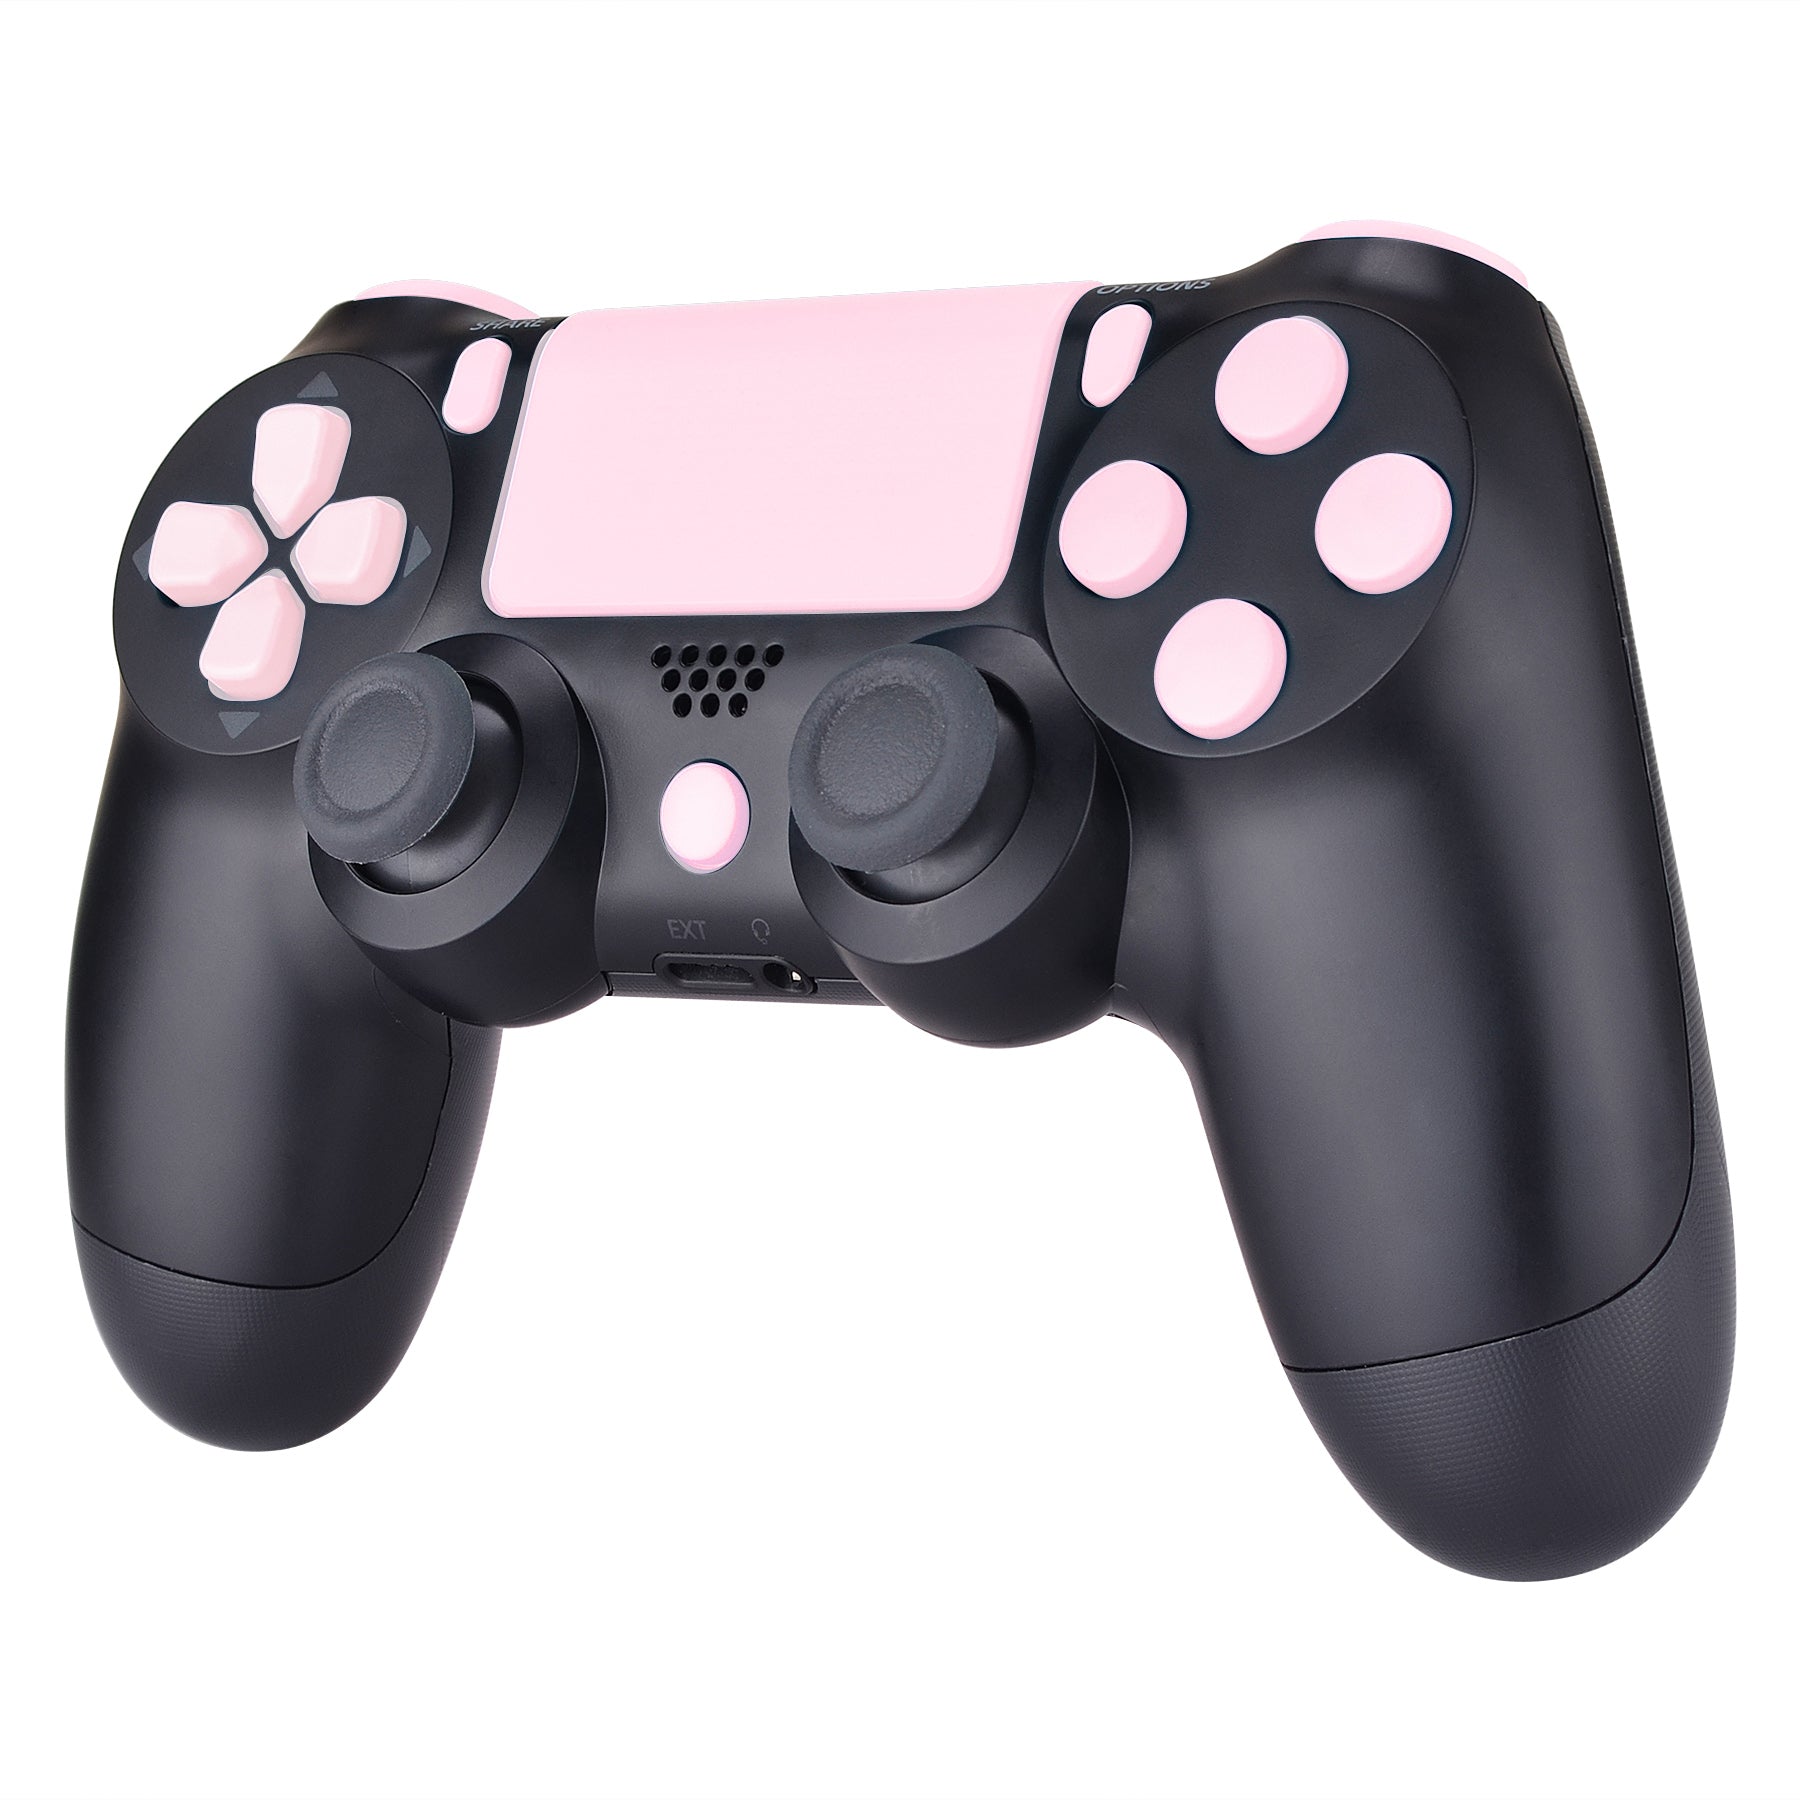 Slim Controller, Full Action Blossoms ps4 – eXtremeRate eXtremeRate Controller Touchpad L1 L2 R2 Triggers Options Buttons Kit Share R1 Home Cherry for D-pad Repair Pro Pink Buttons for Set Replacement ps4